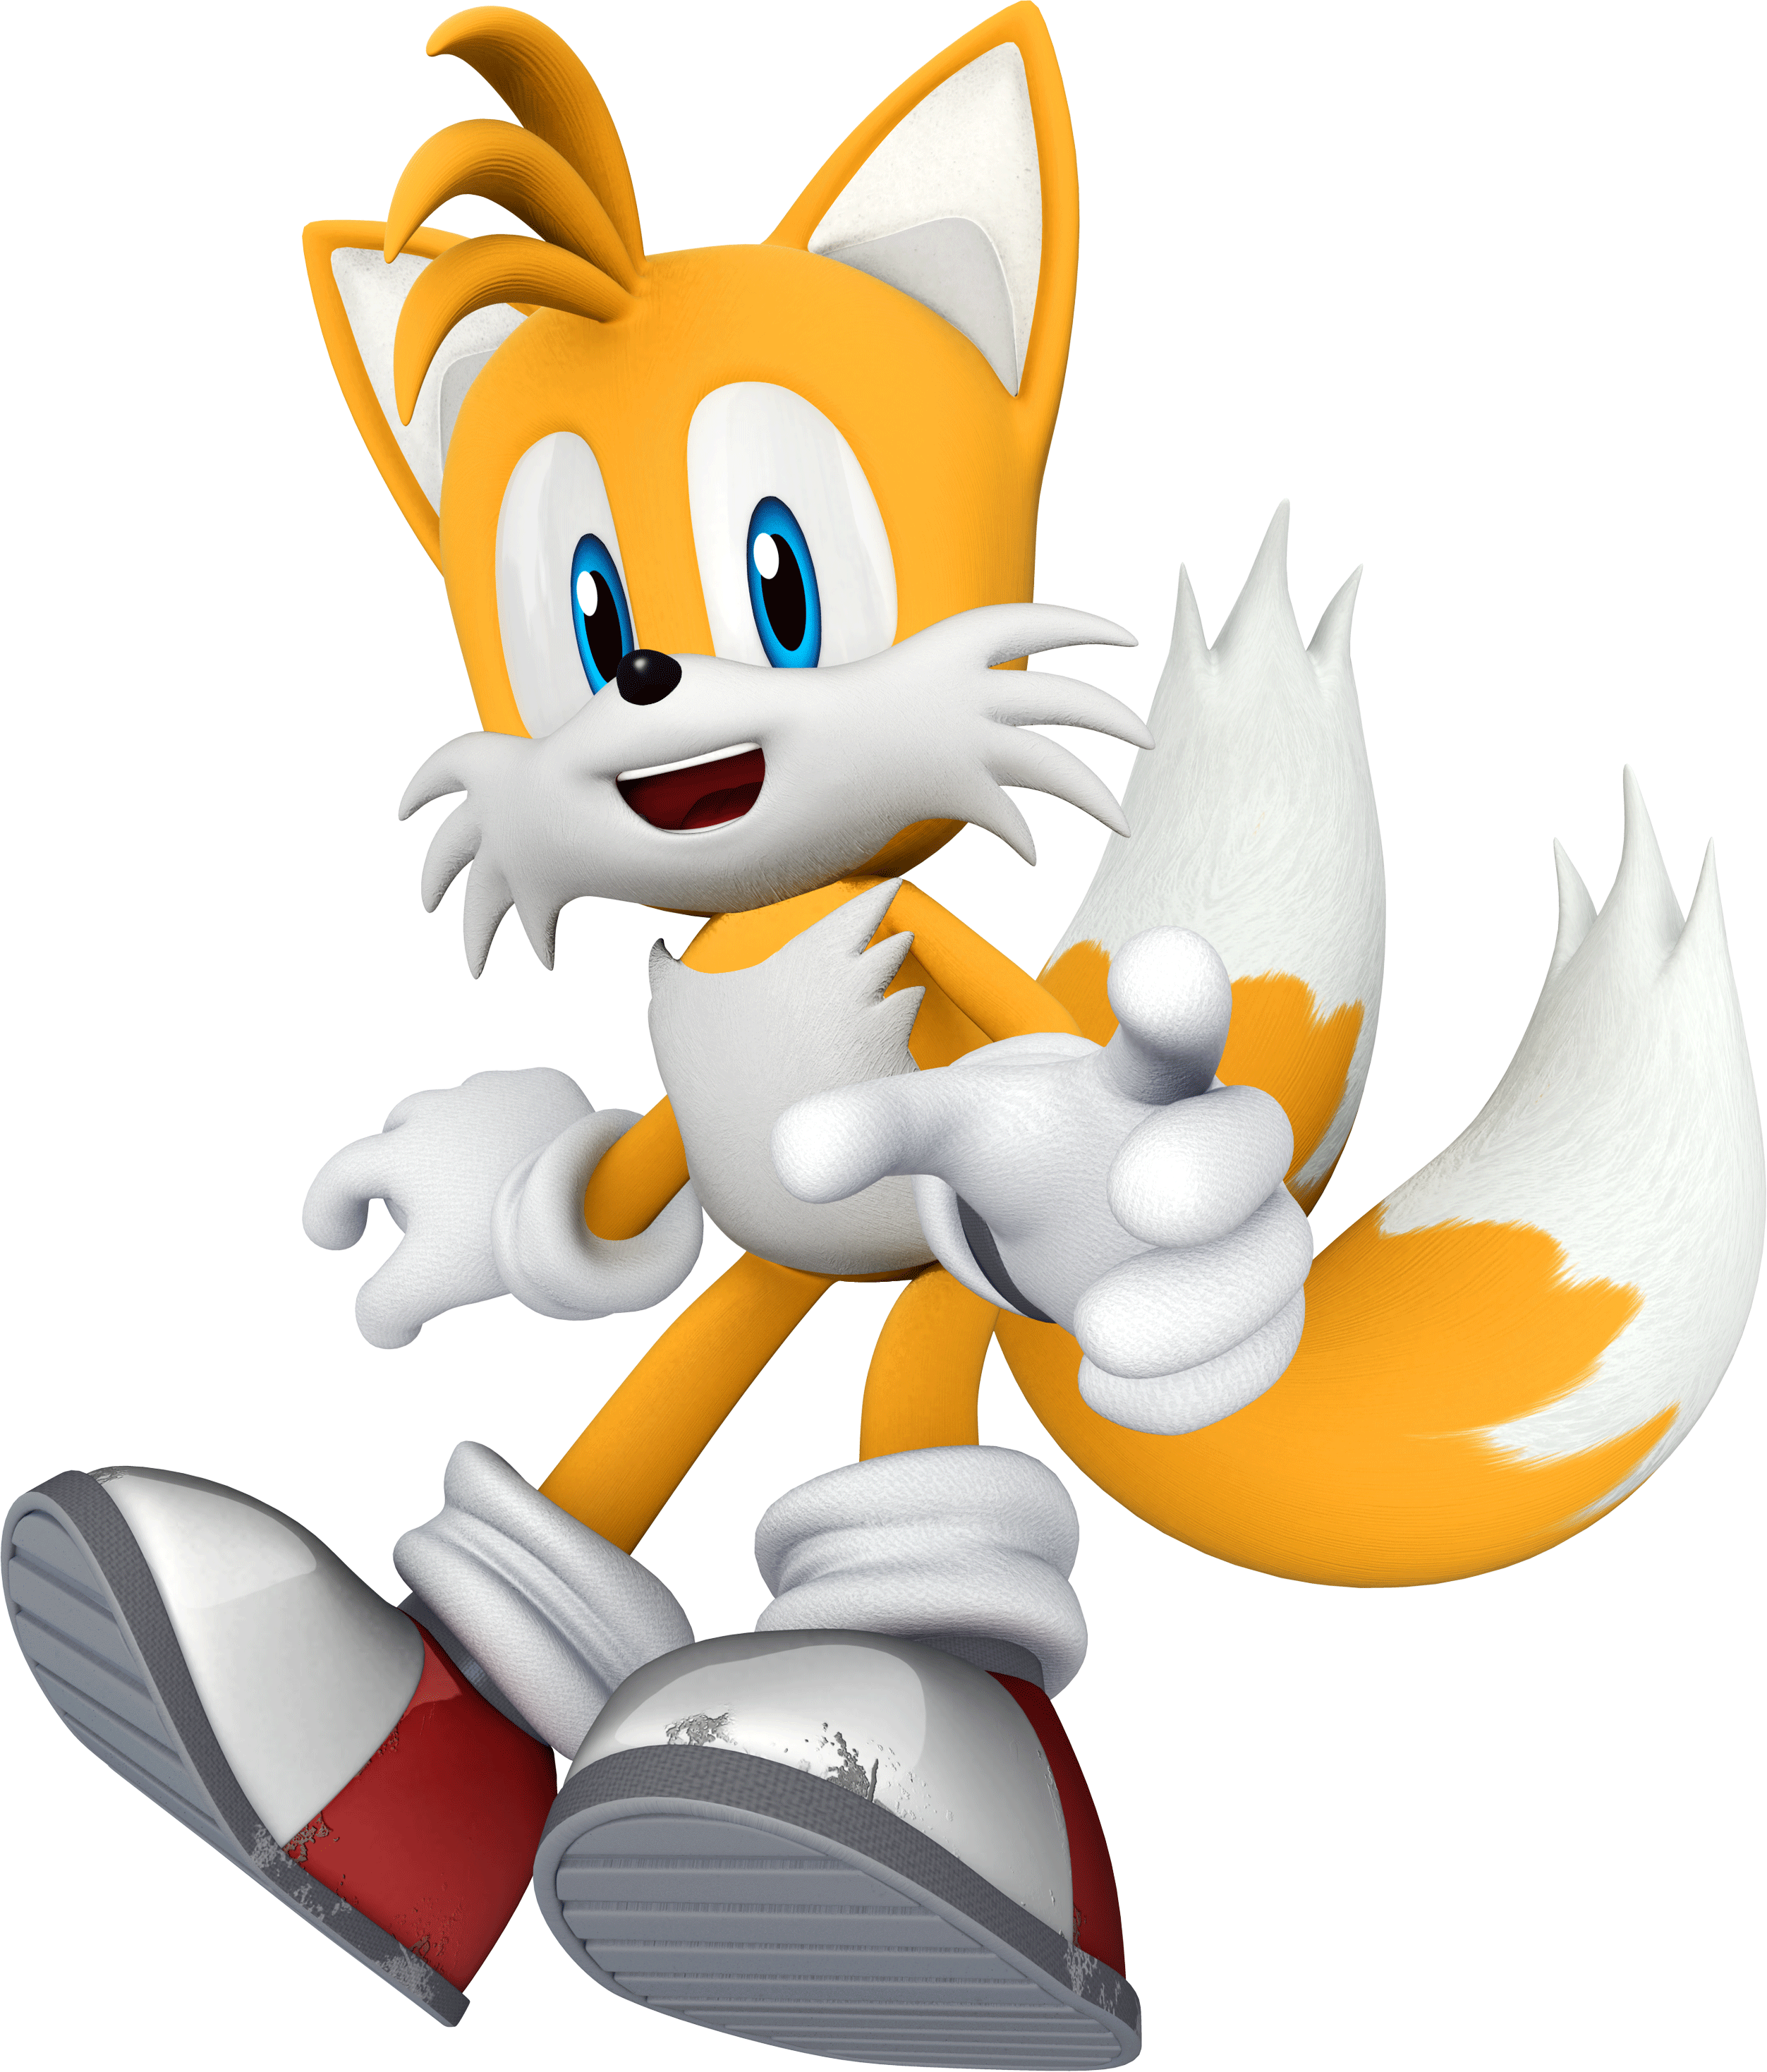 Miles Tails Prower Sonic News Network Fandom Powered By Wikia